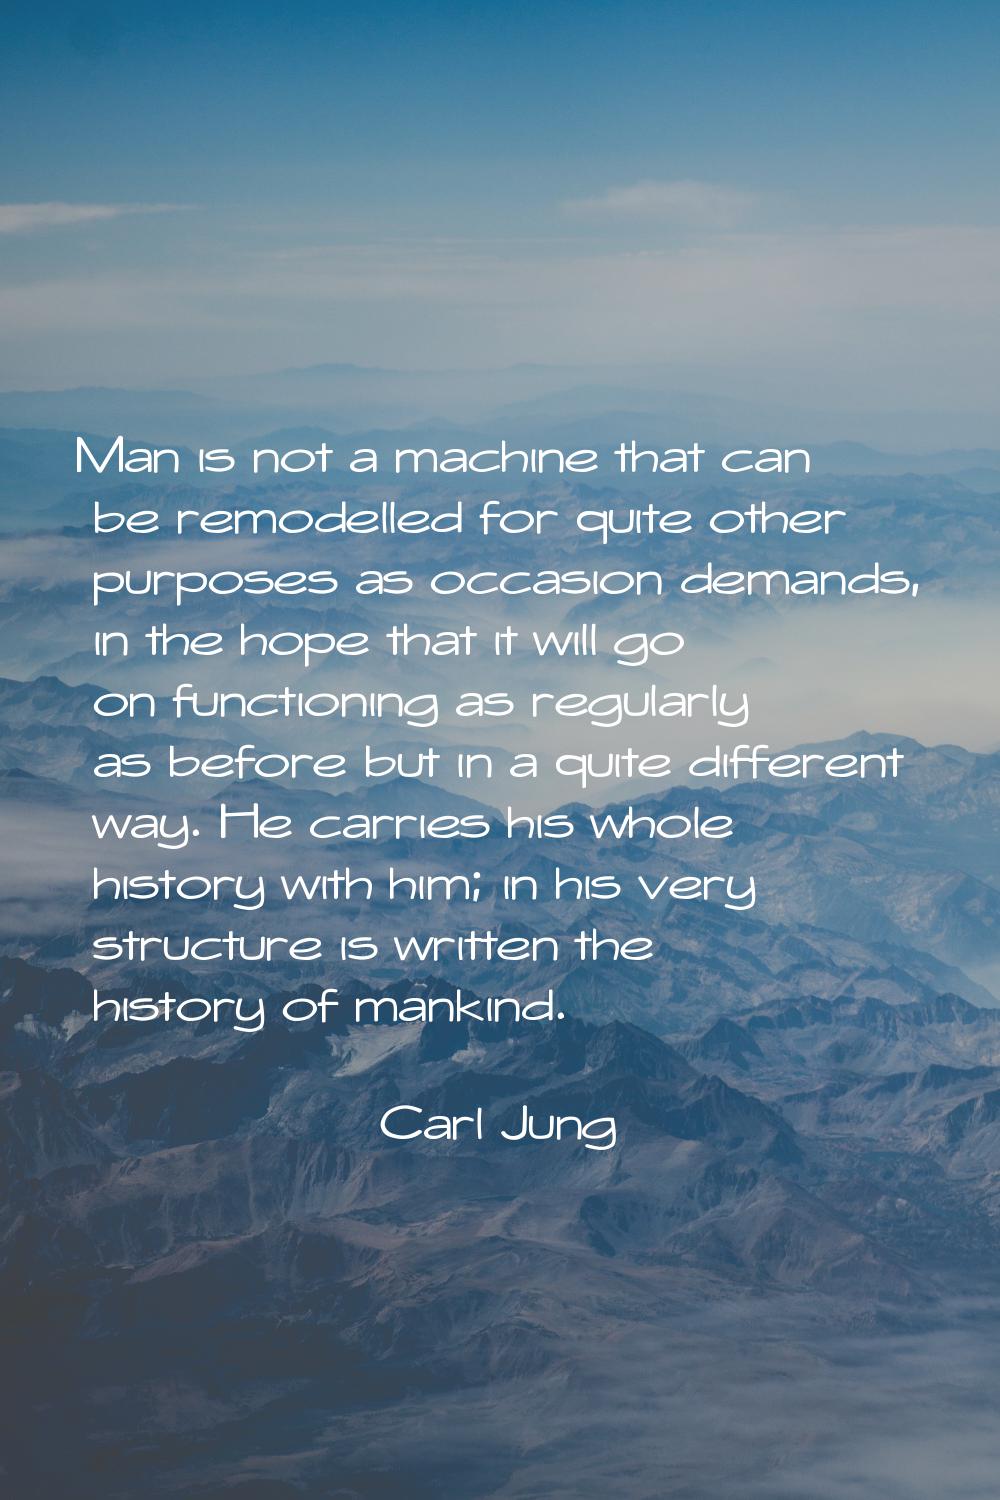 Man is not a machine that can be remodelled for quite other purposes as occasion demands, in the ho